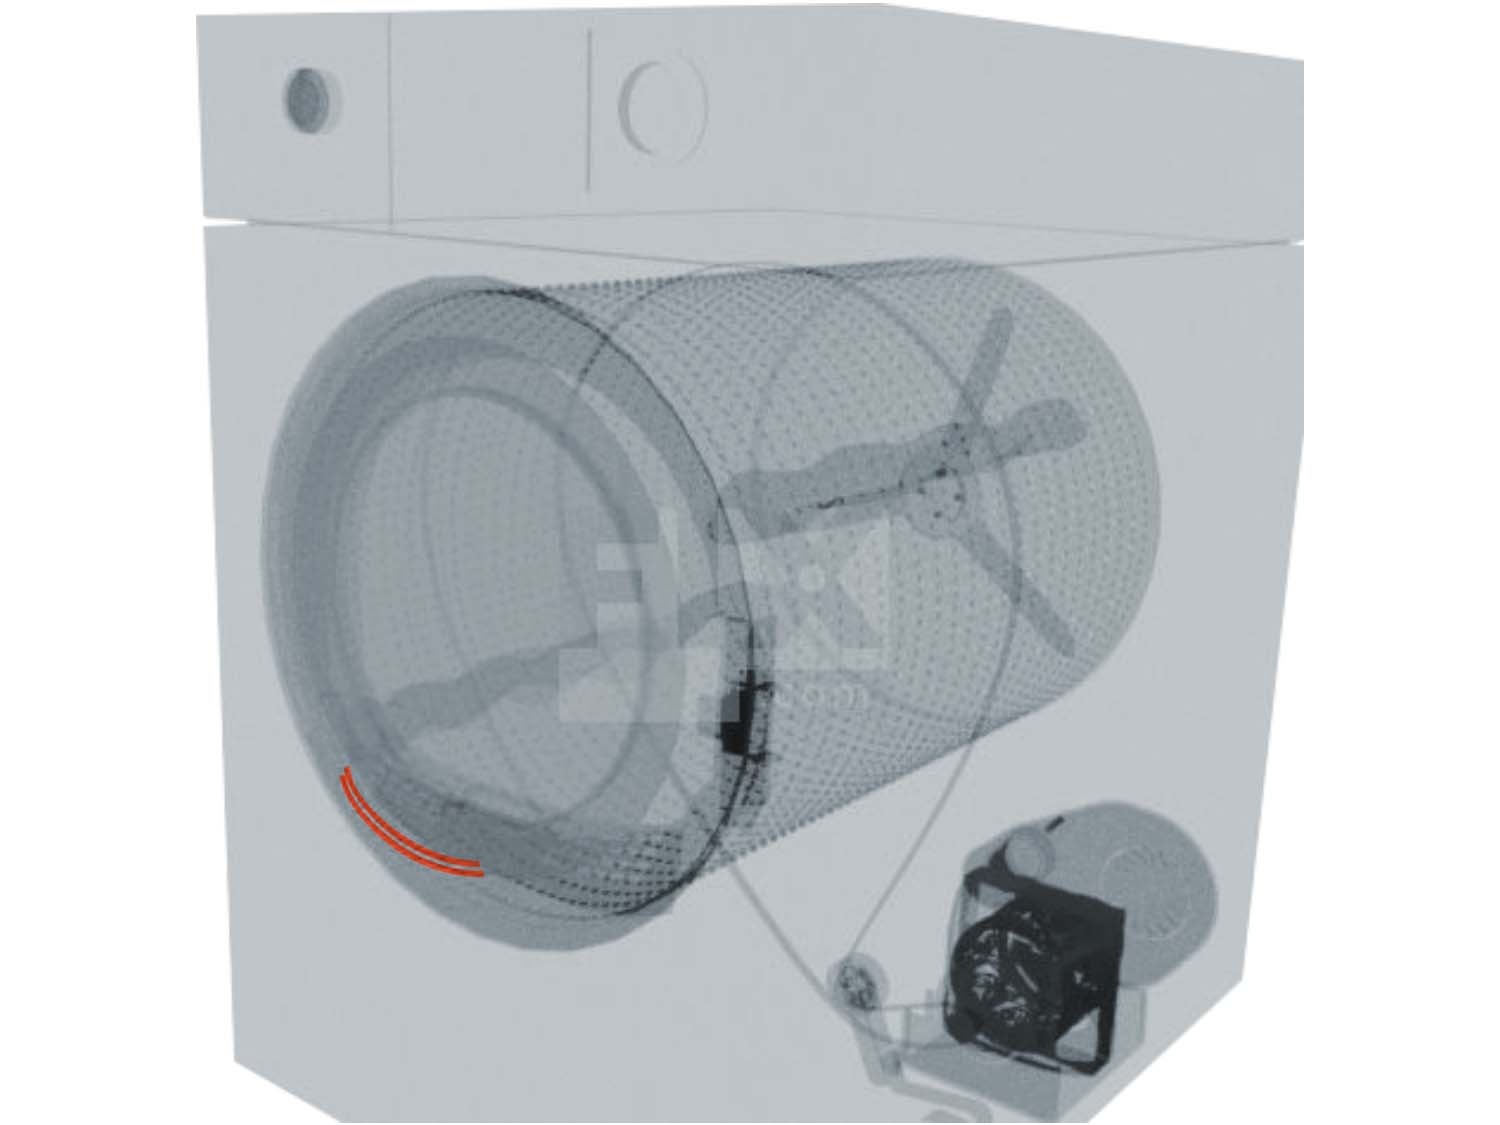 A 3D diagram showing the components of a dryer and specifying the location of the moisture sensor bars